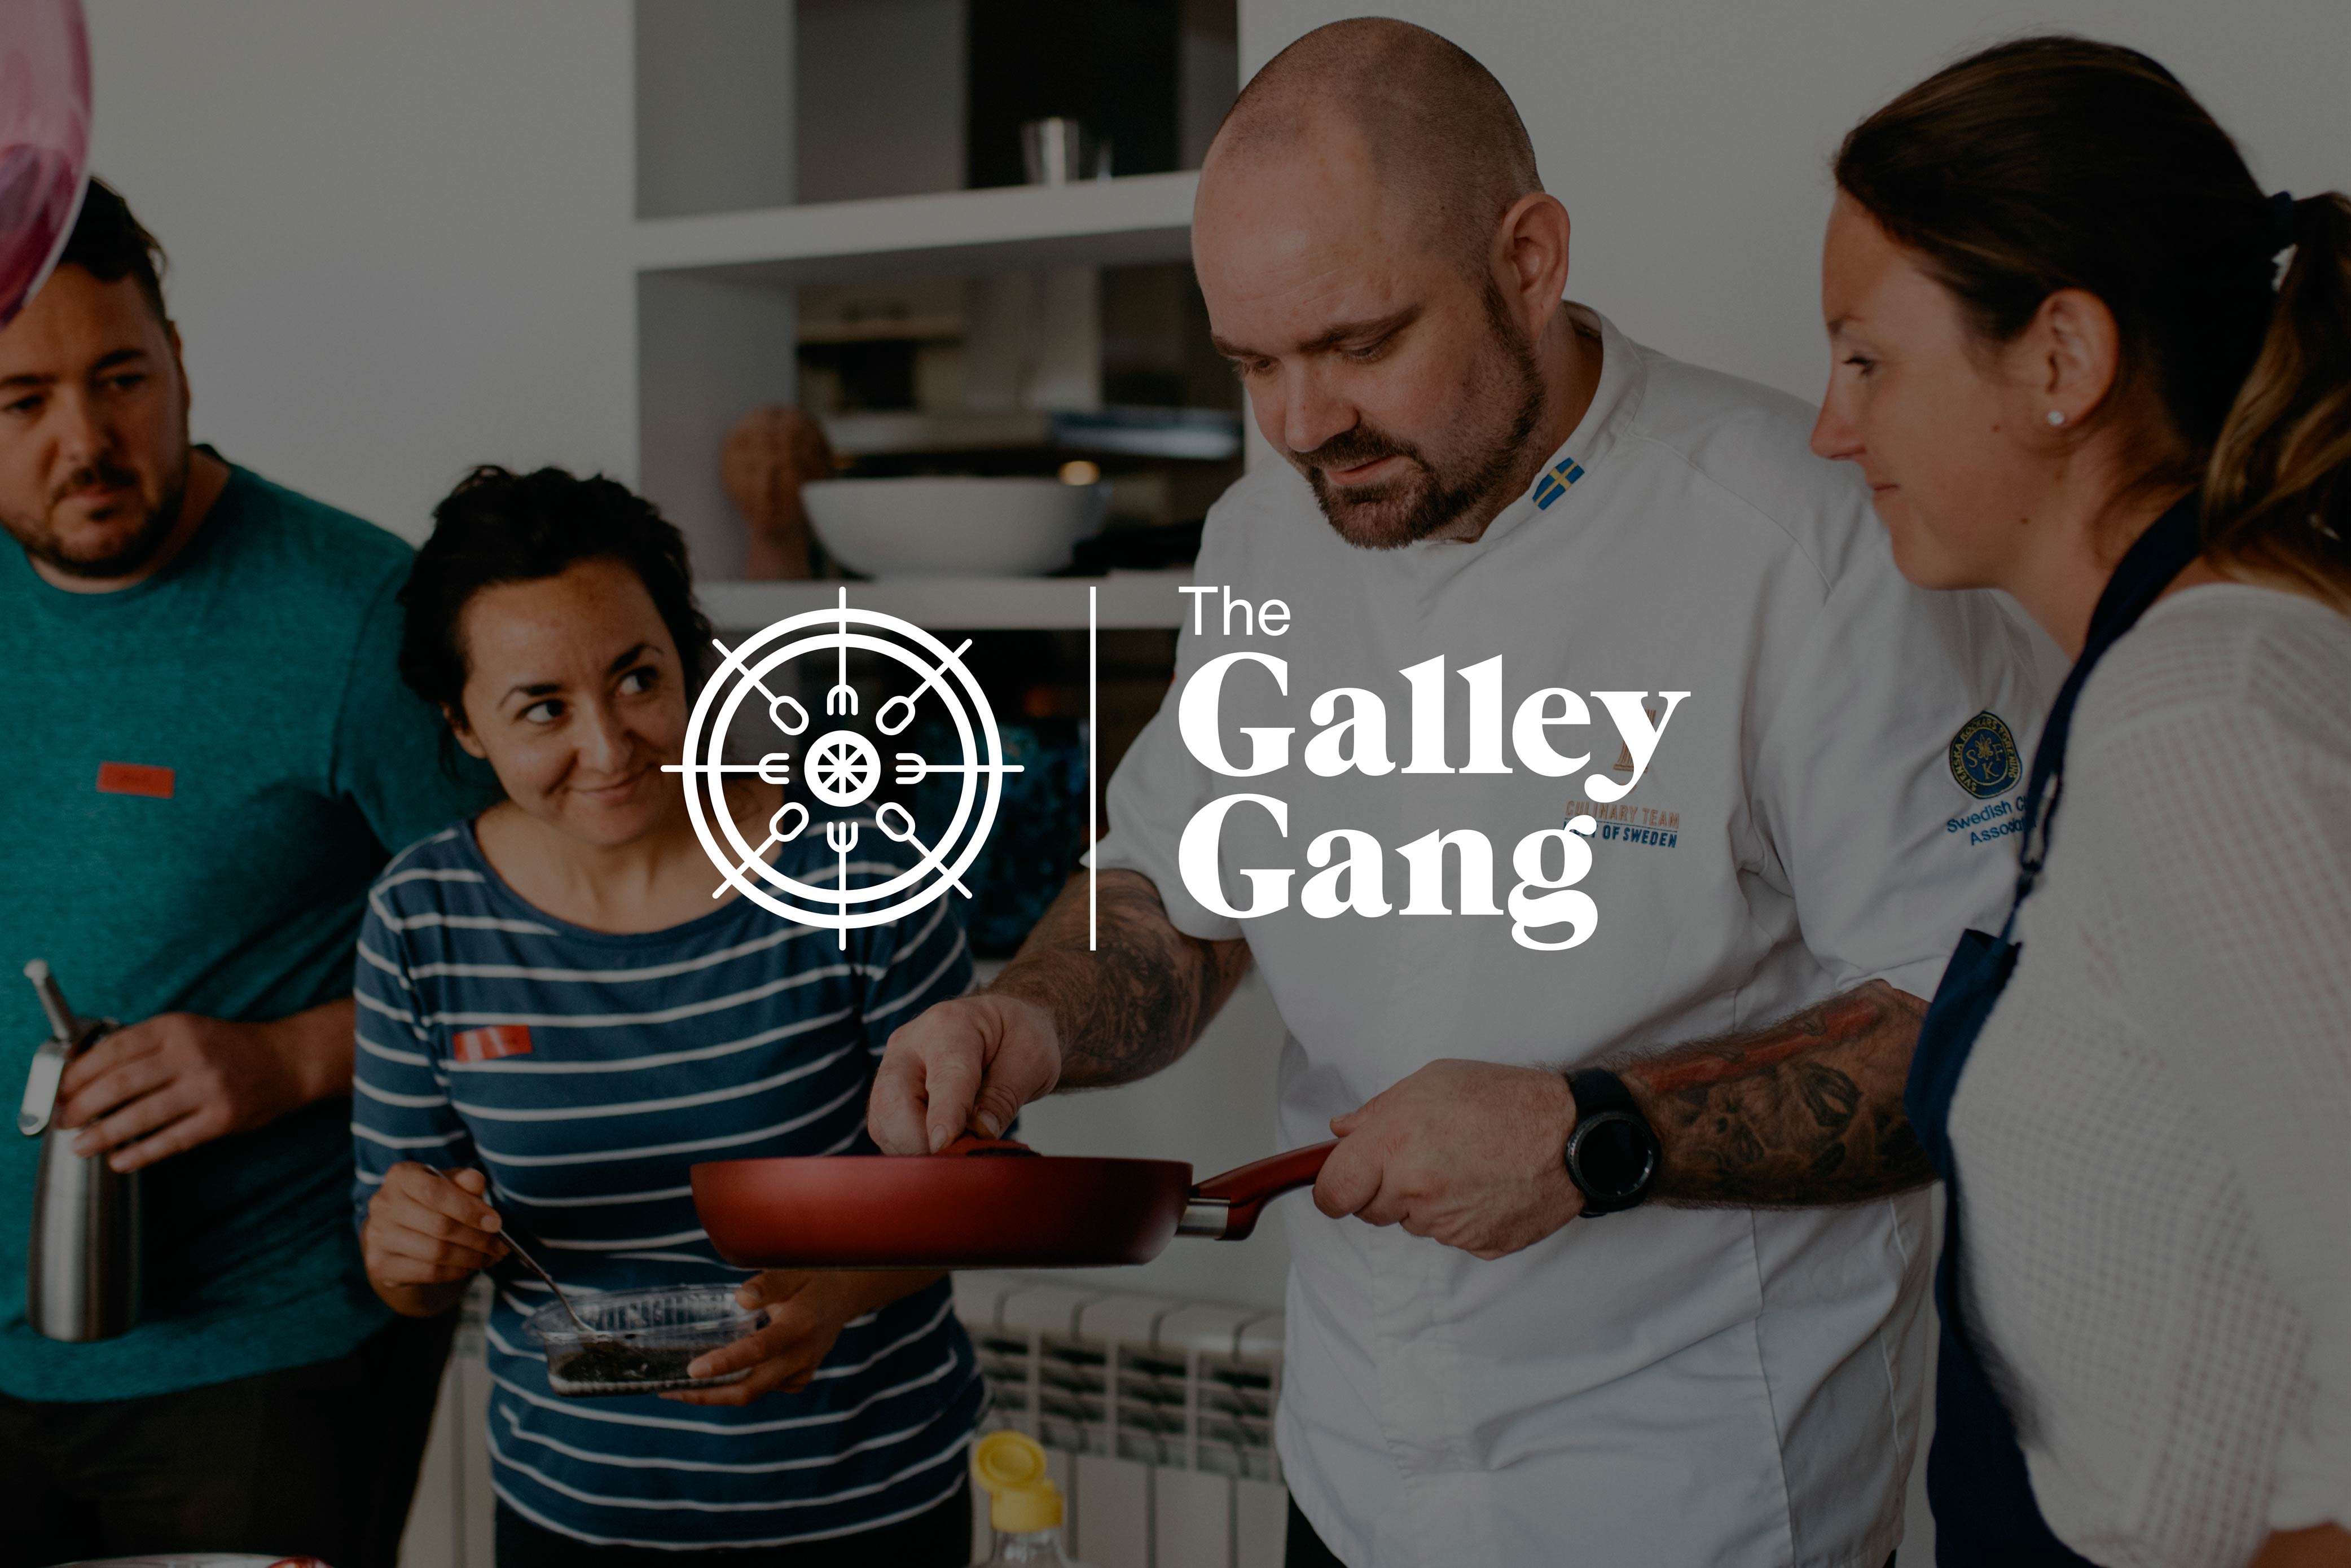 Image of a chef cooking at a Galley Gang workshop with the Galley Gang logo over the top of the image